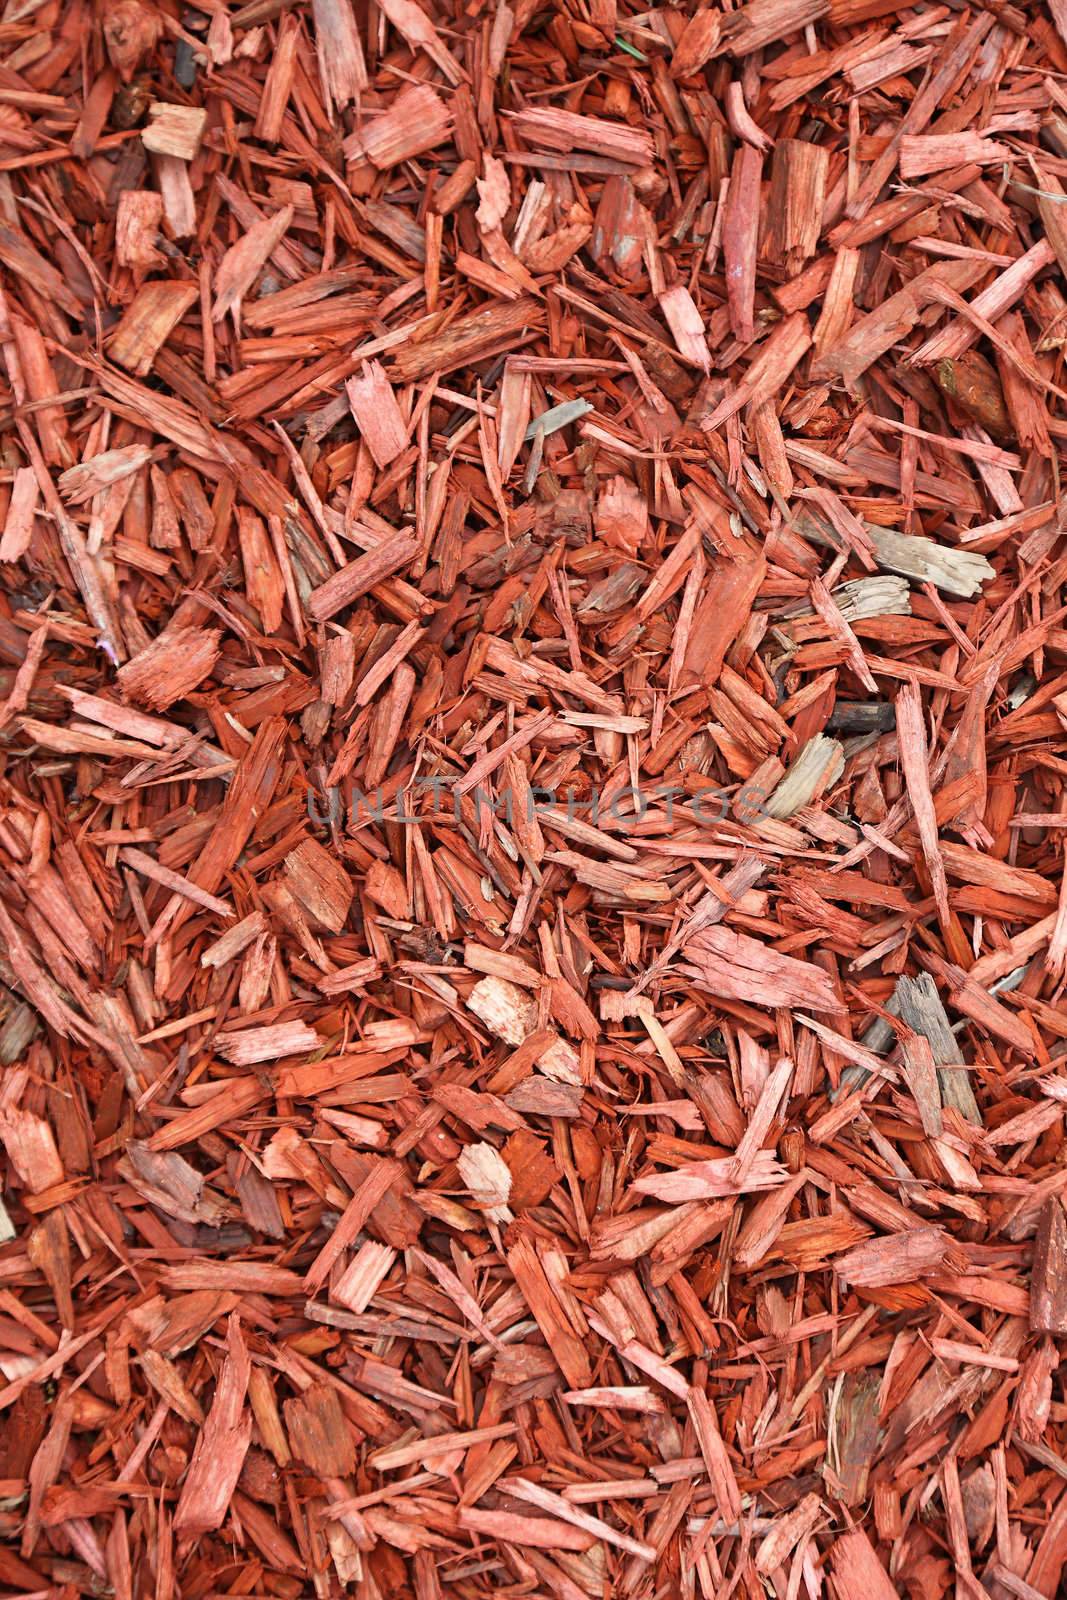 Red woodchips as textured background.